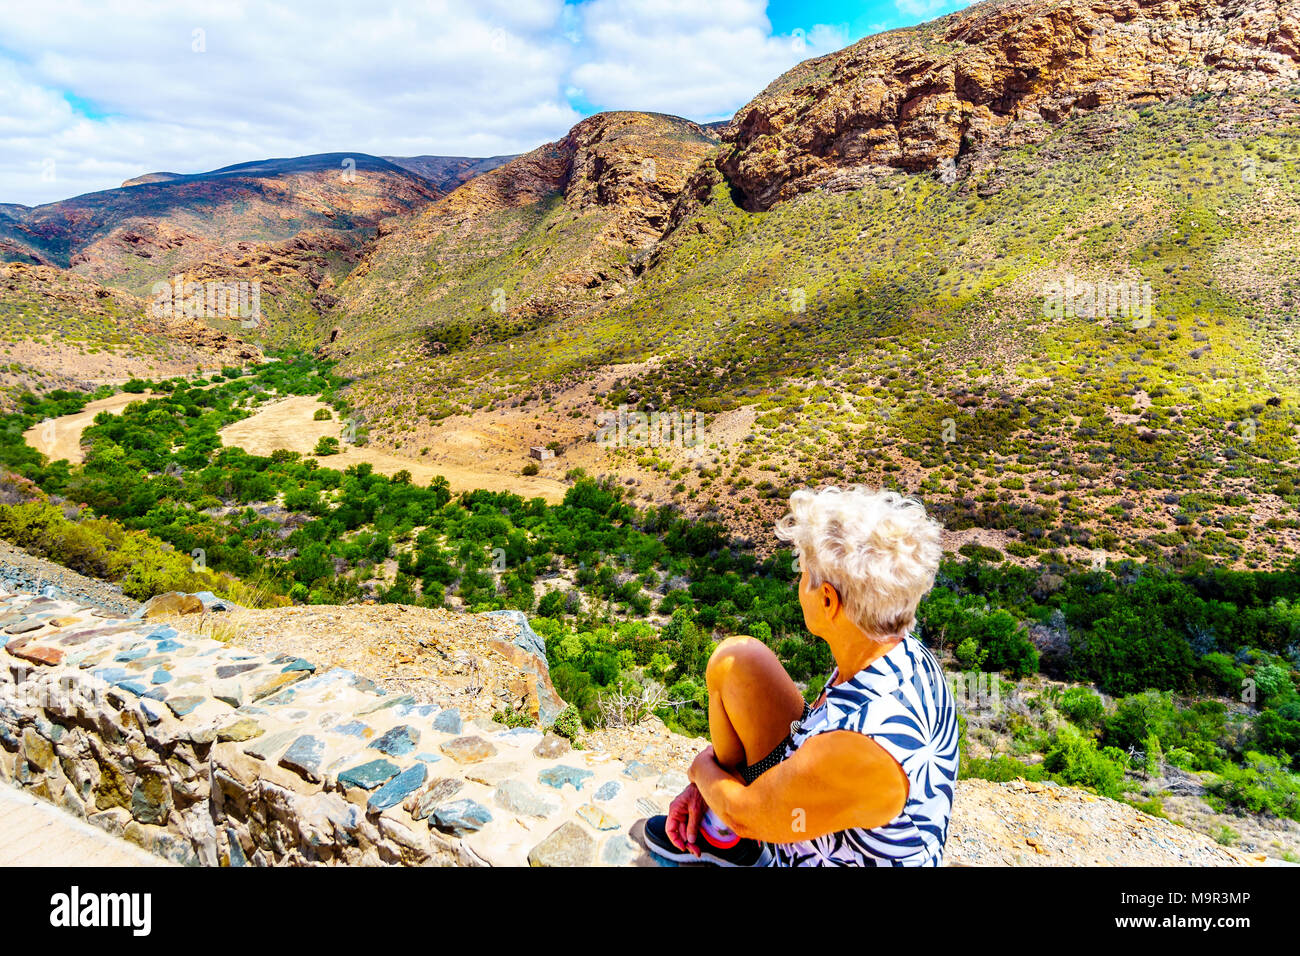 Senior woman enjoying the view of the Huisrivierpas, between Ladismith and Calitzdorp in the Little Karoo of the Western Cape Province of South Africa Stock Photo